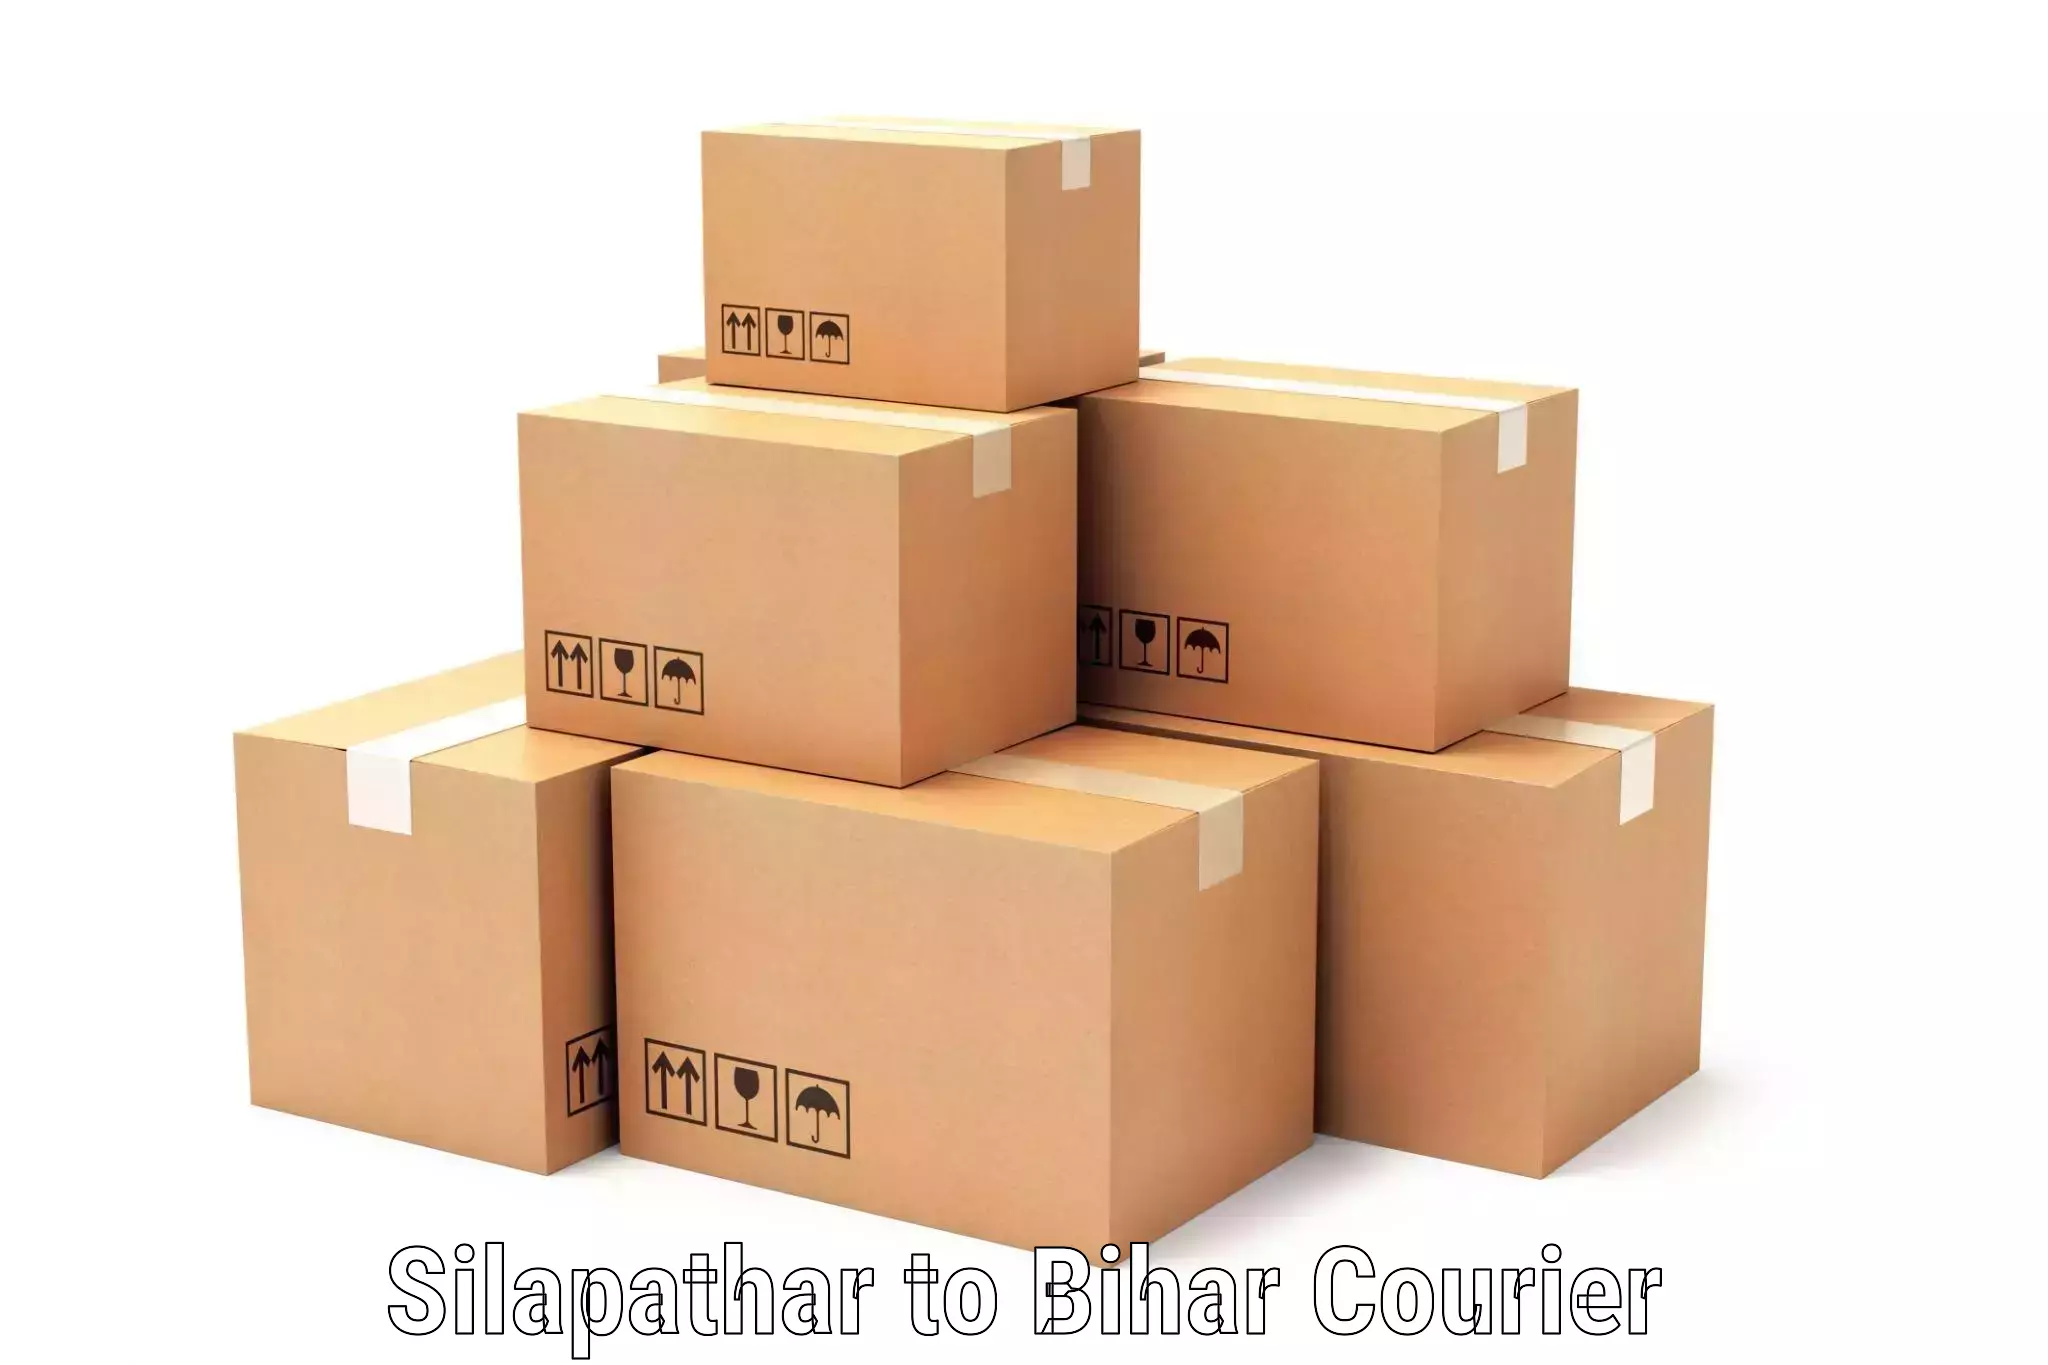 High-capacity courier solutions Silapathar to Sheonar